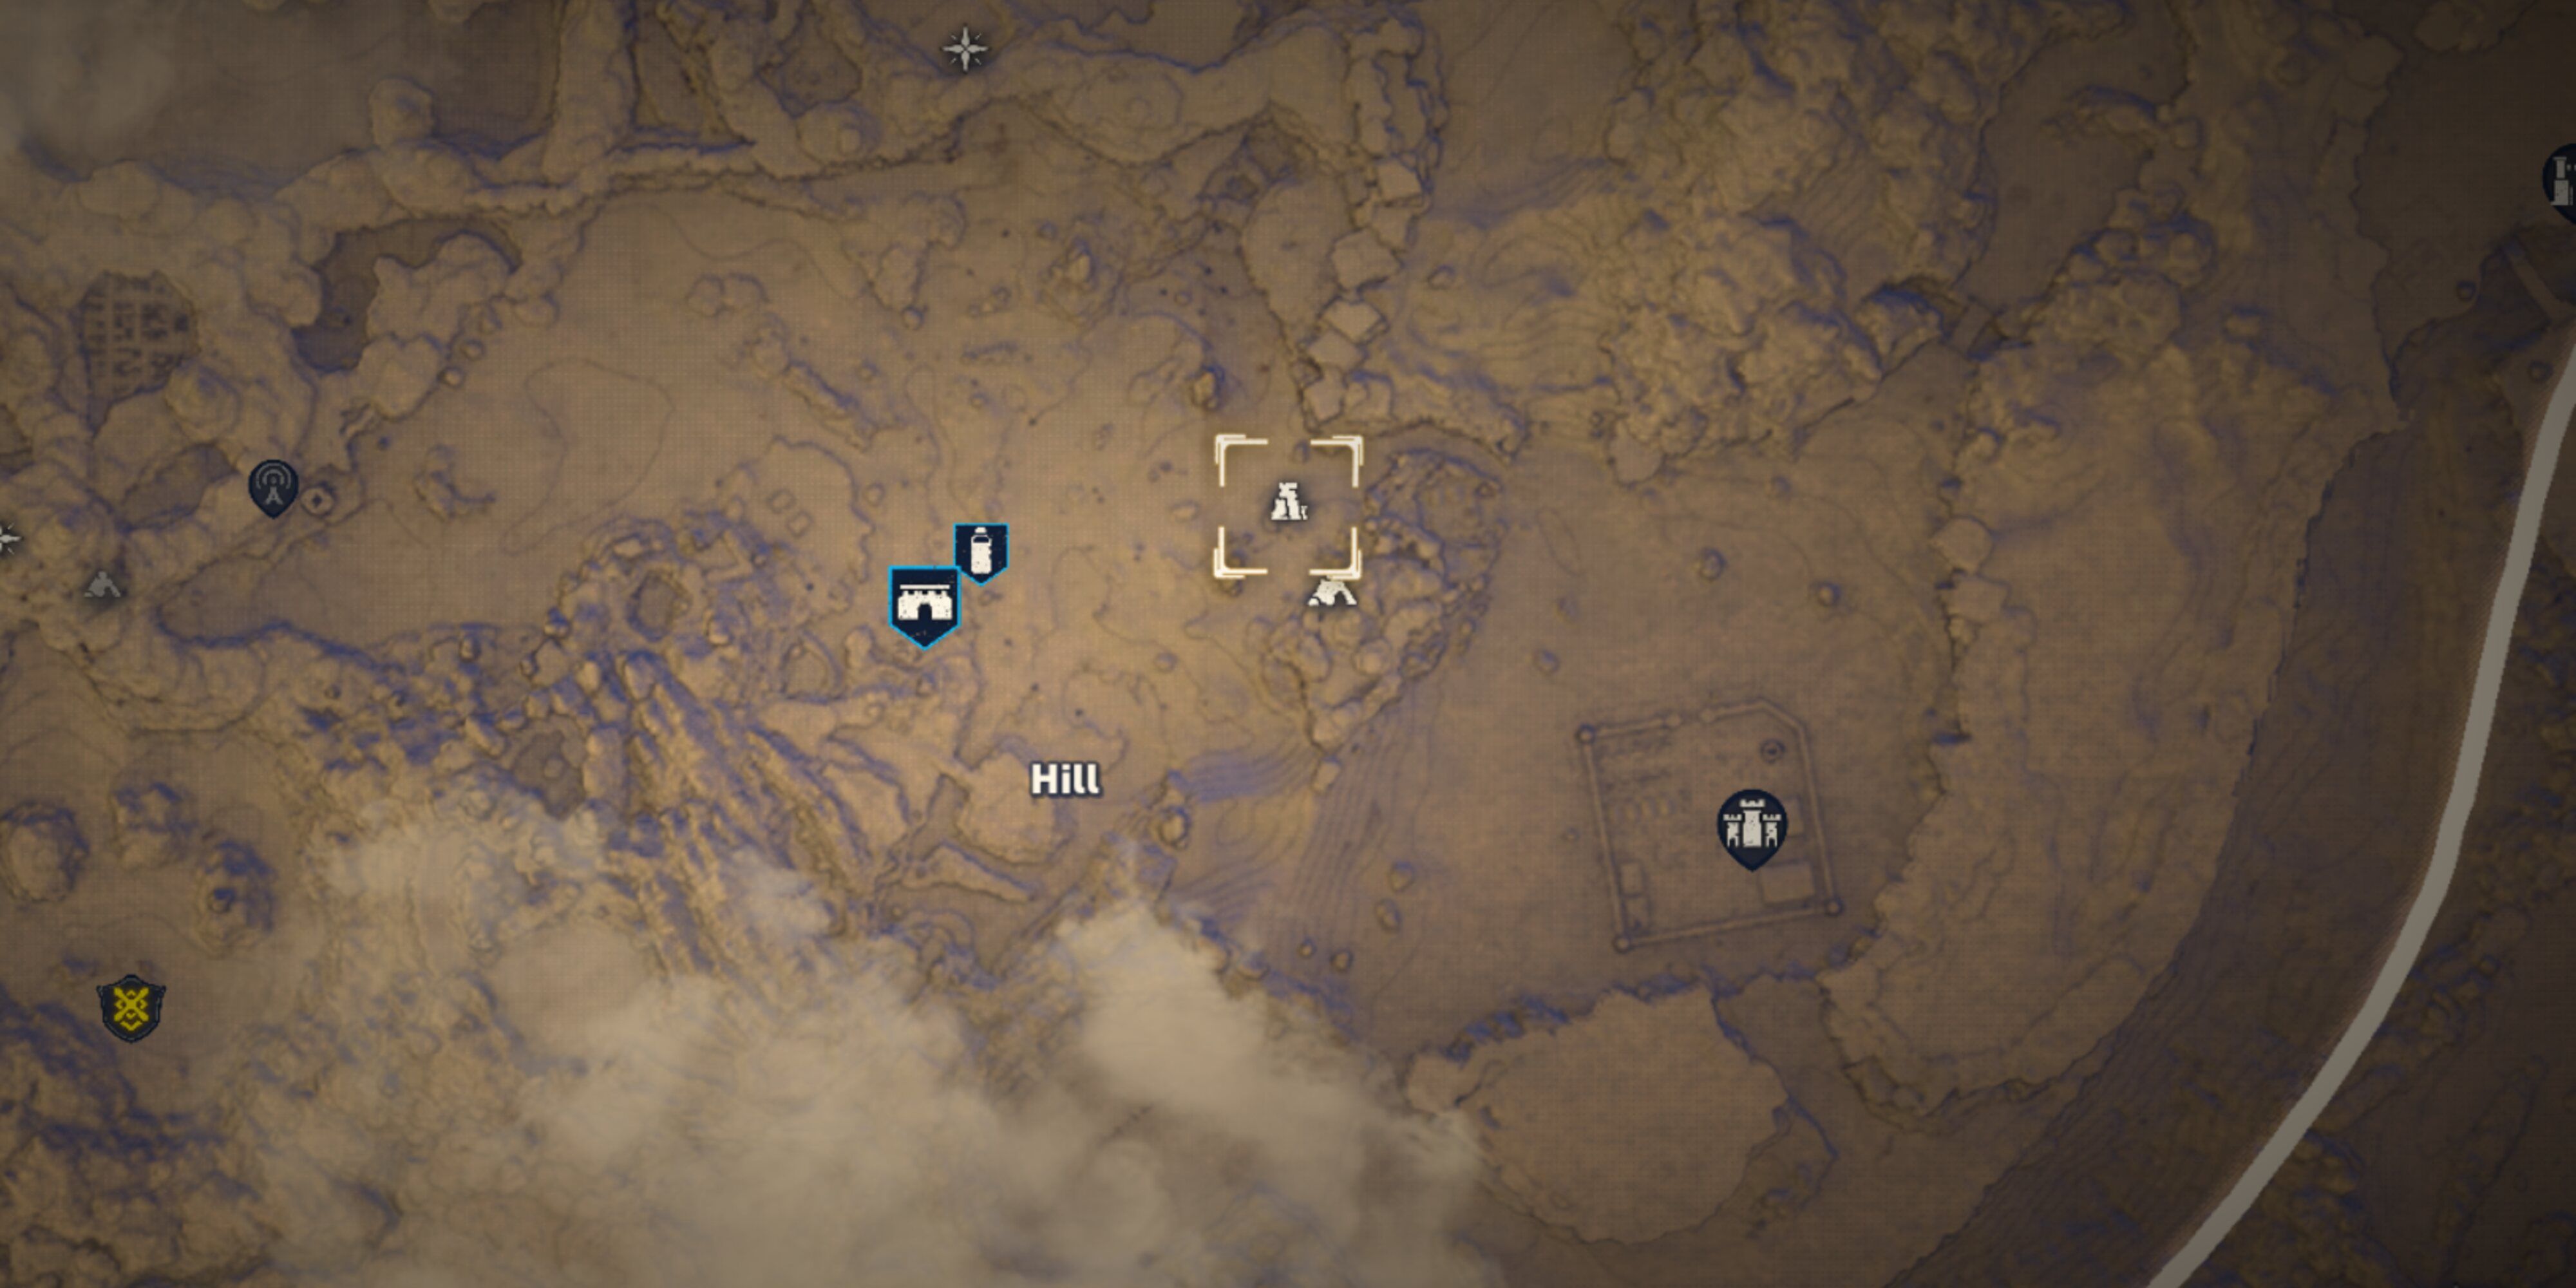 Hill Icon on Map Sand Land